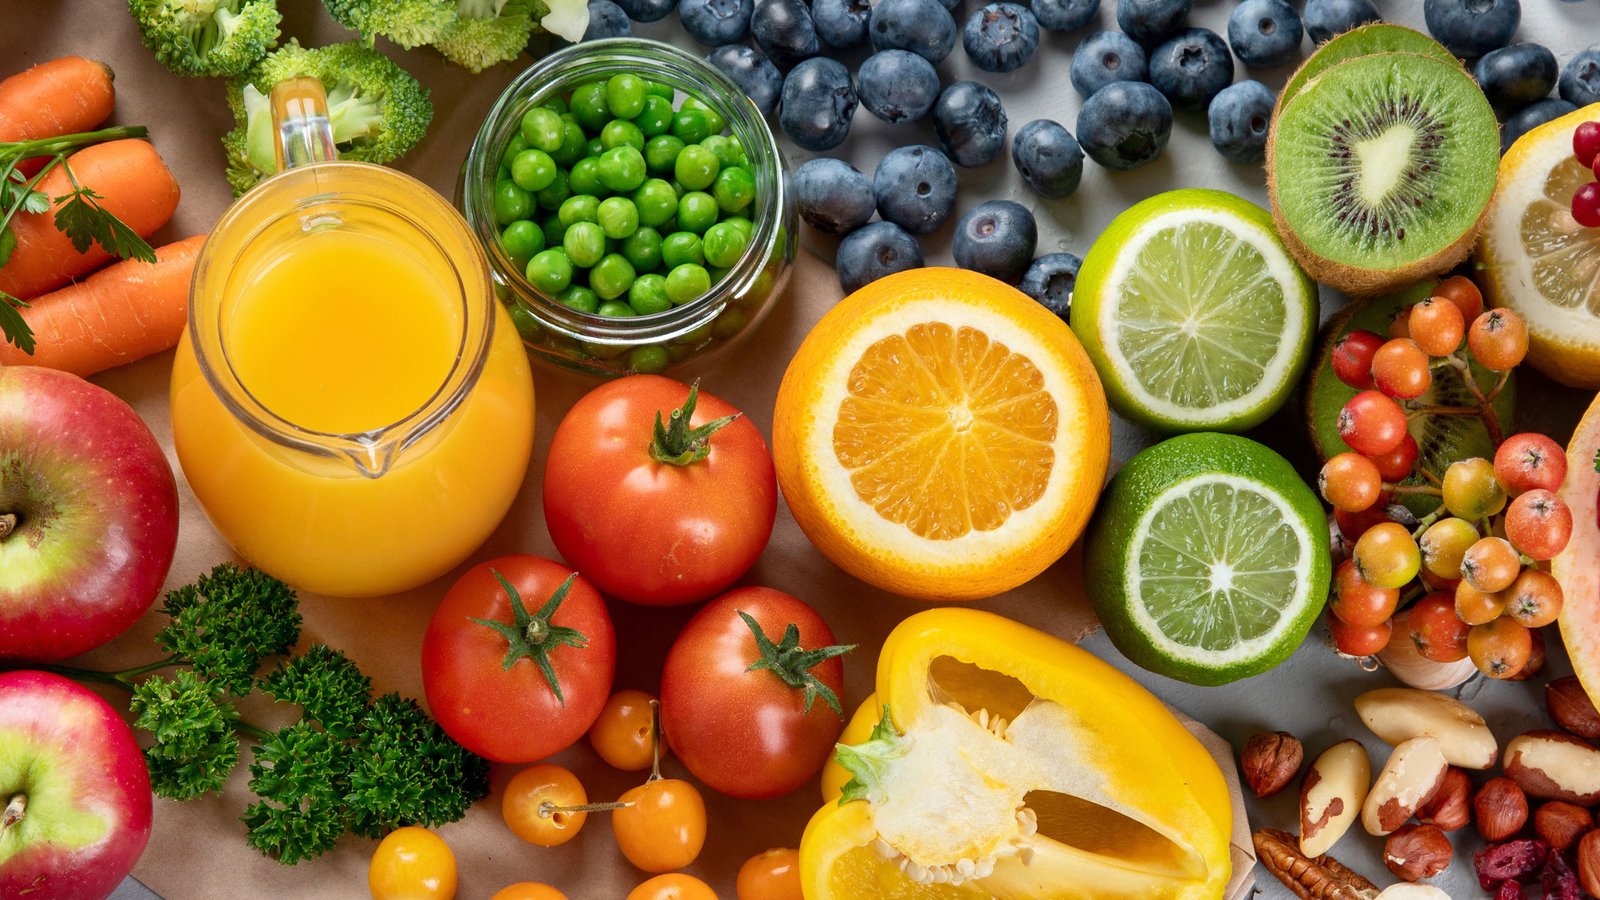 Orange, kiwi, tomatoes, and other nutrient-filled fruits